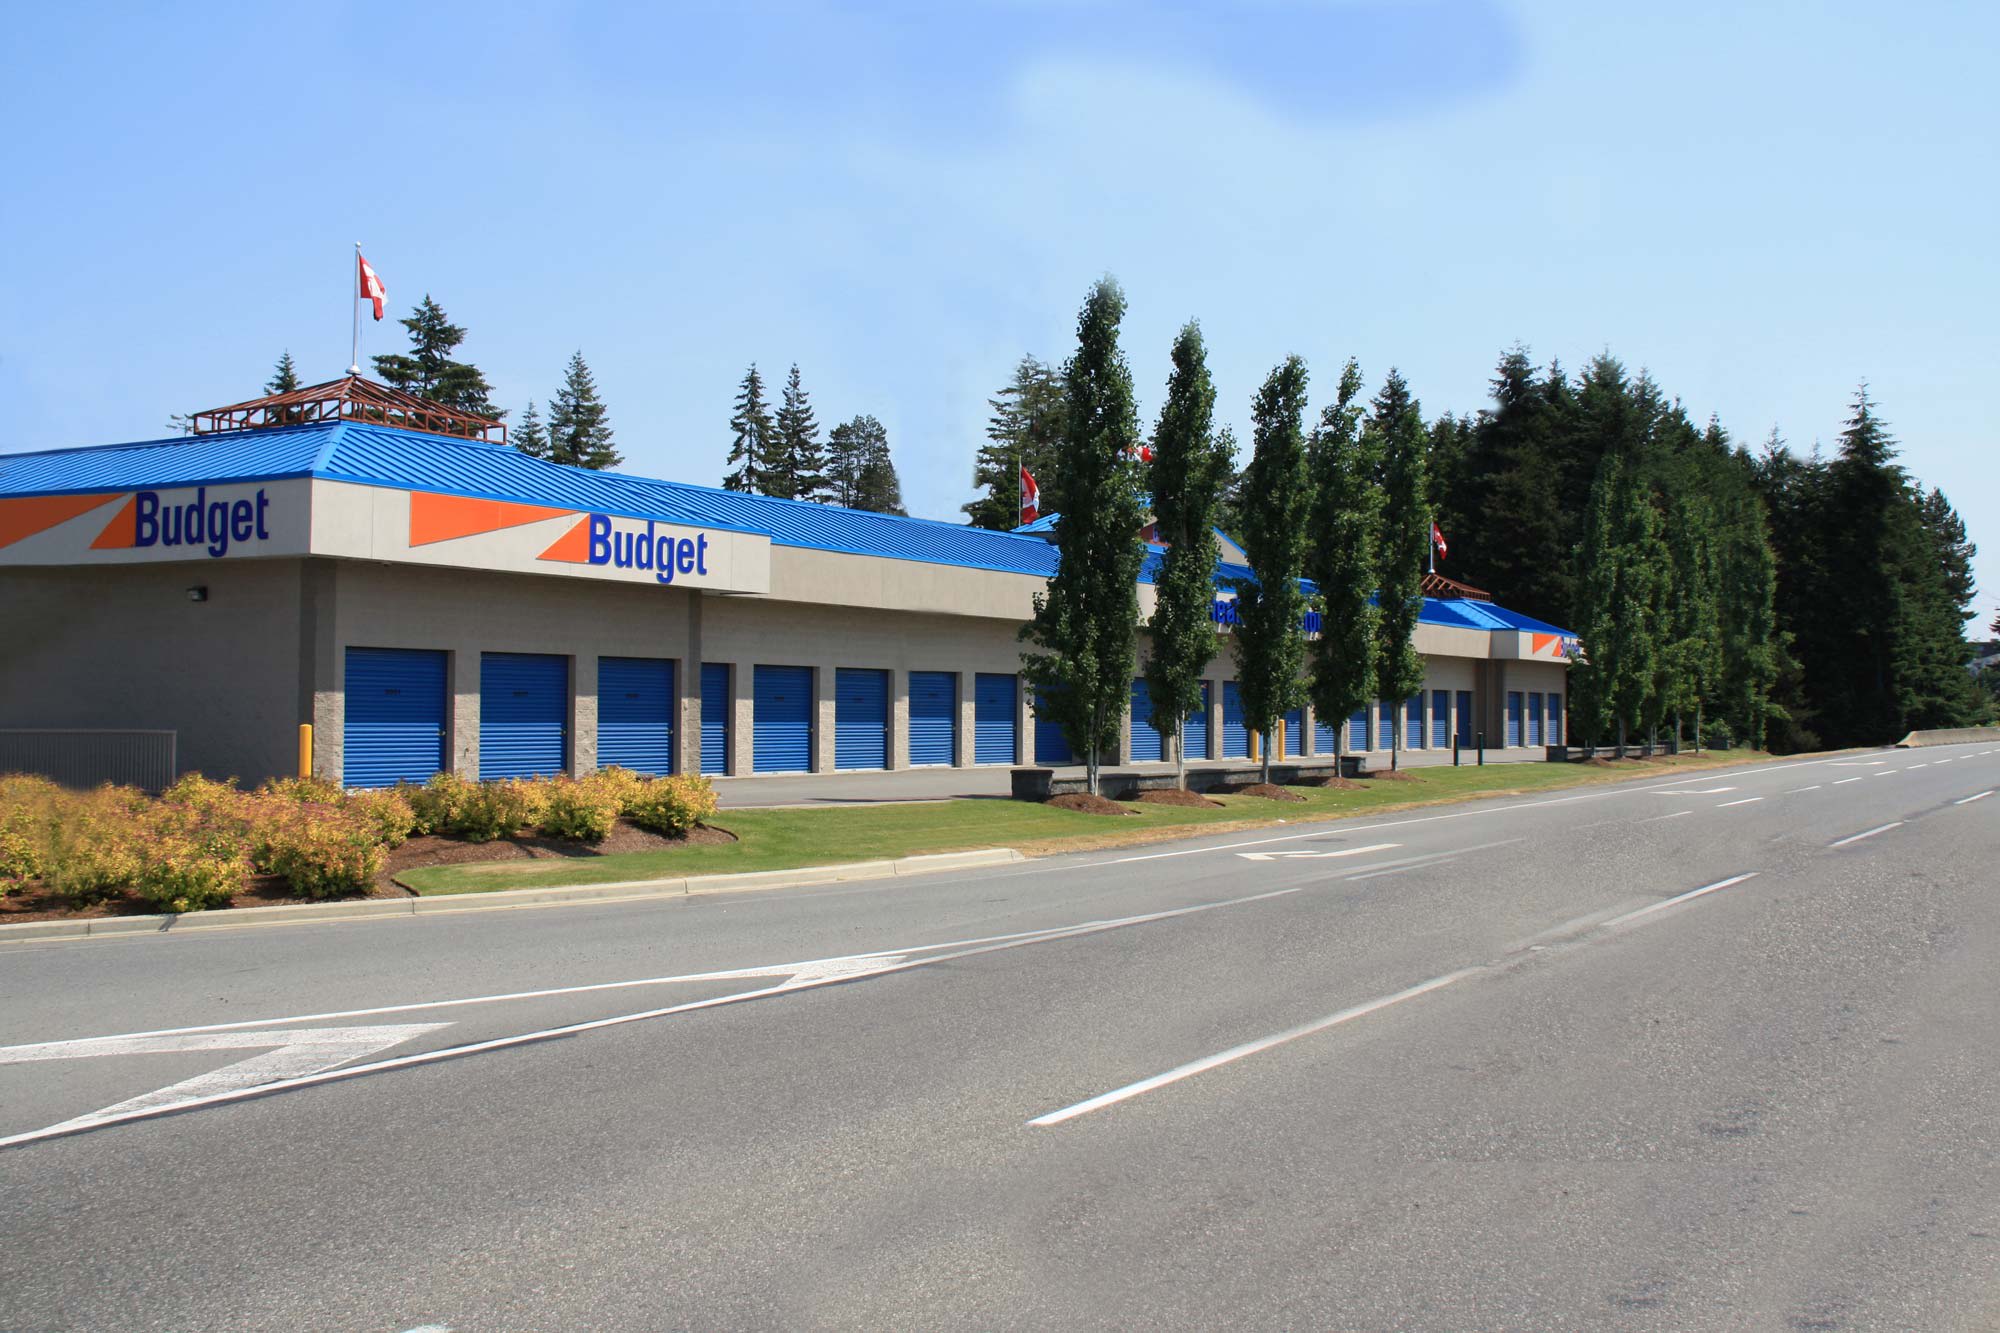 Office view from the road for Budget Self Storage in Nanaimo, British Columbia. 